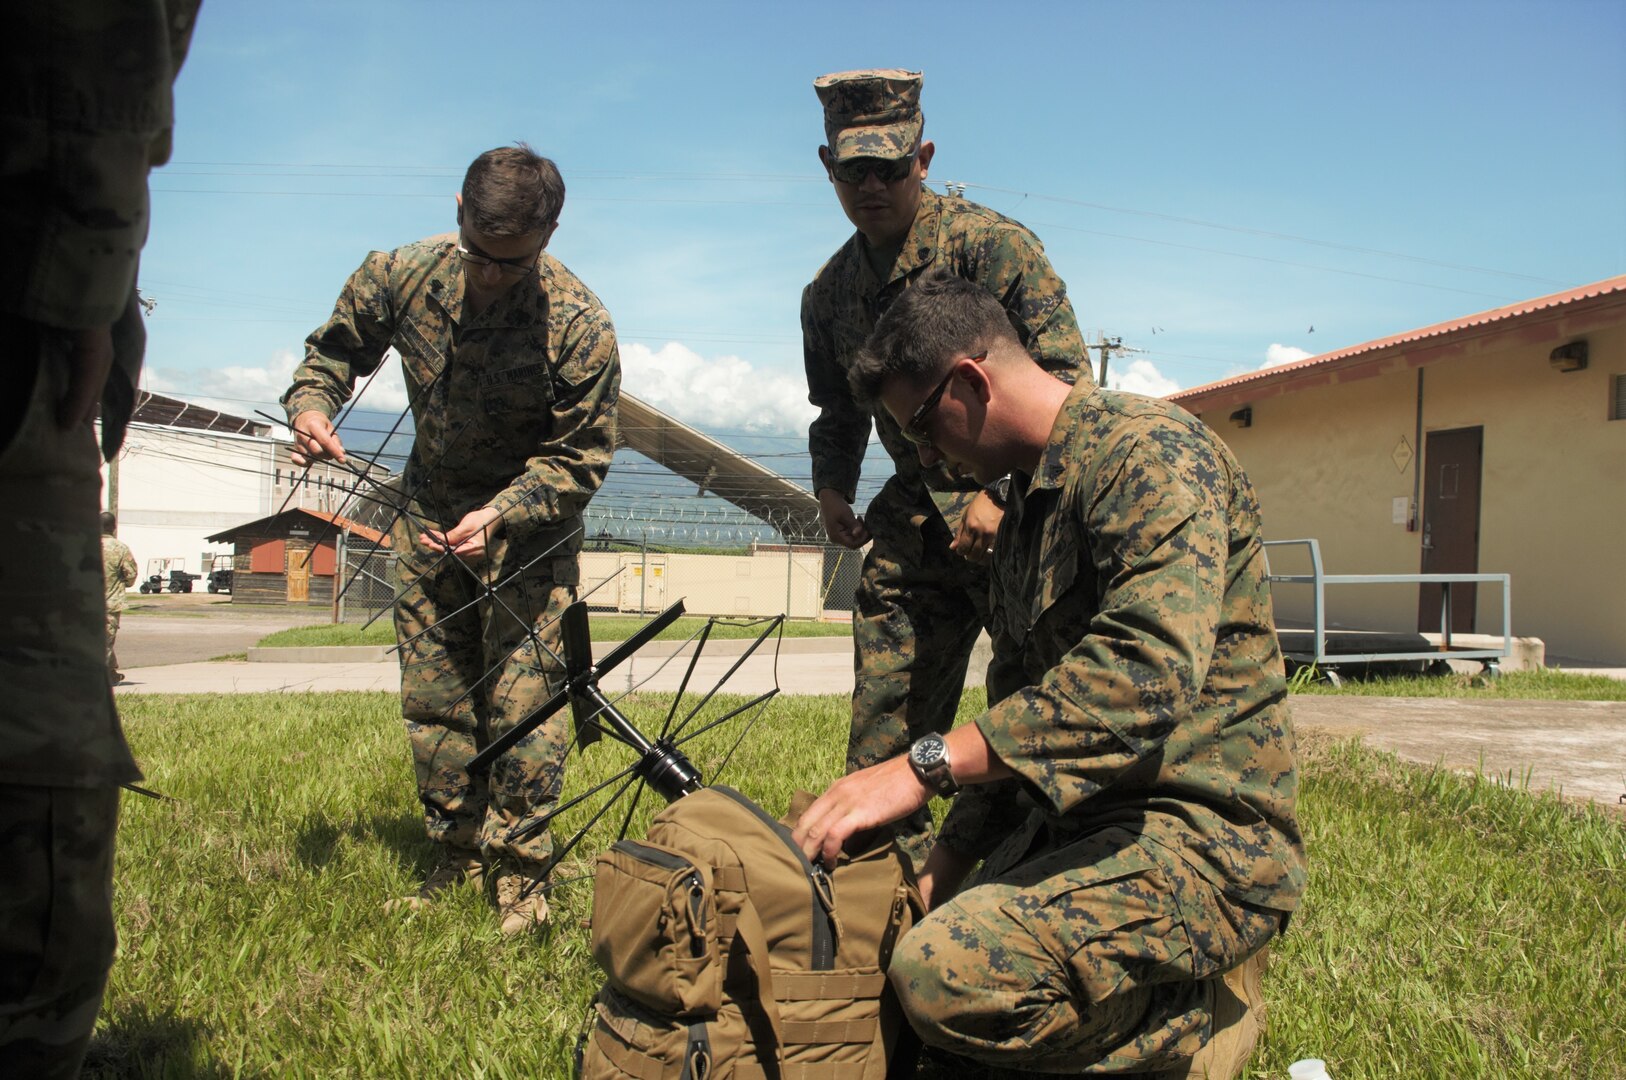 Marines with Special Purpose Marine Air-Ground Task Force - Southern Command’s communications section prepare to sync their equipment with that of their counterparts in Joint Task Force - Bravo's 1st Battalion, 228th Aviation Regiment’s communications section during a communications exercise aboard Soto Cano Air Base, Honduras, to prepare for future joint-level operations, June 19, 2018. The Marines and sailors of SPMAGTF-SC are conducting security cooperation training and engineering projects alongside partner nation military forces in Central and South America. The unit is also on standby to provide humanitarian assistance and disaster relief in the event of a hurricane or other emergency in the region.